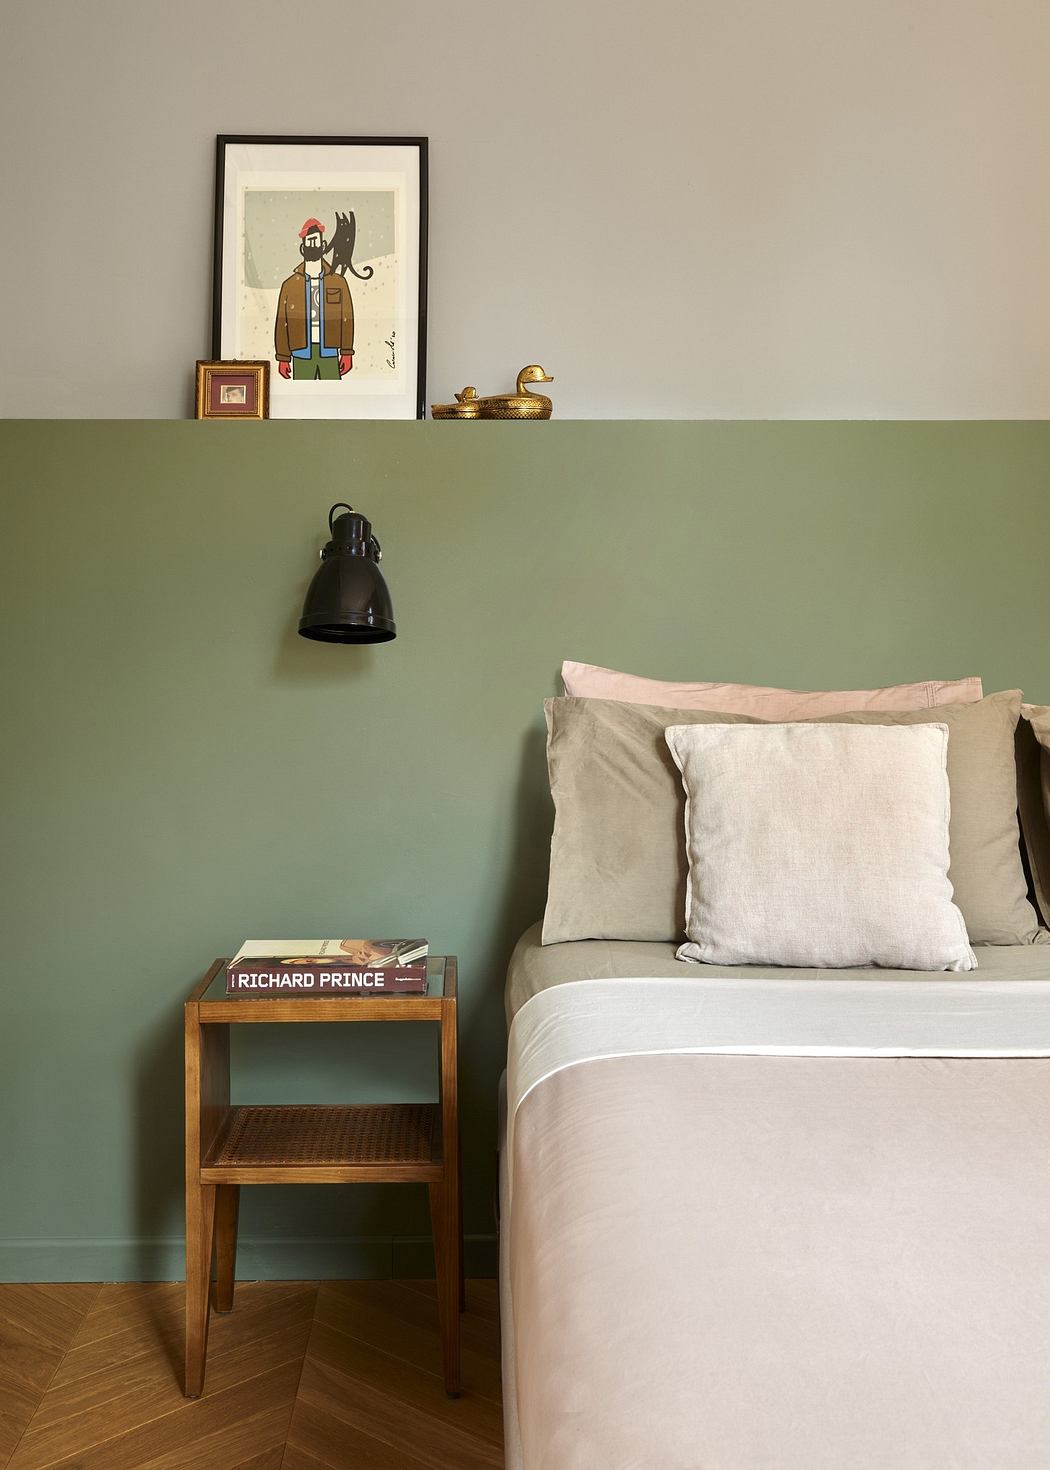 A cozy bedroom corner with a two-tone wall, art frame, side table with